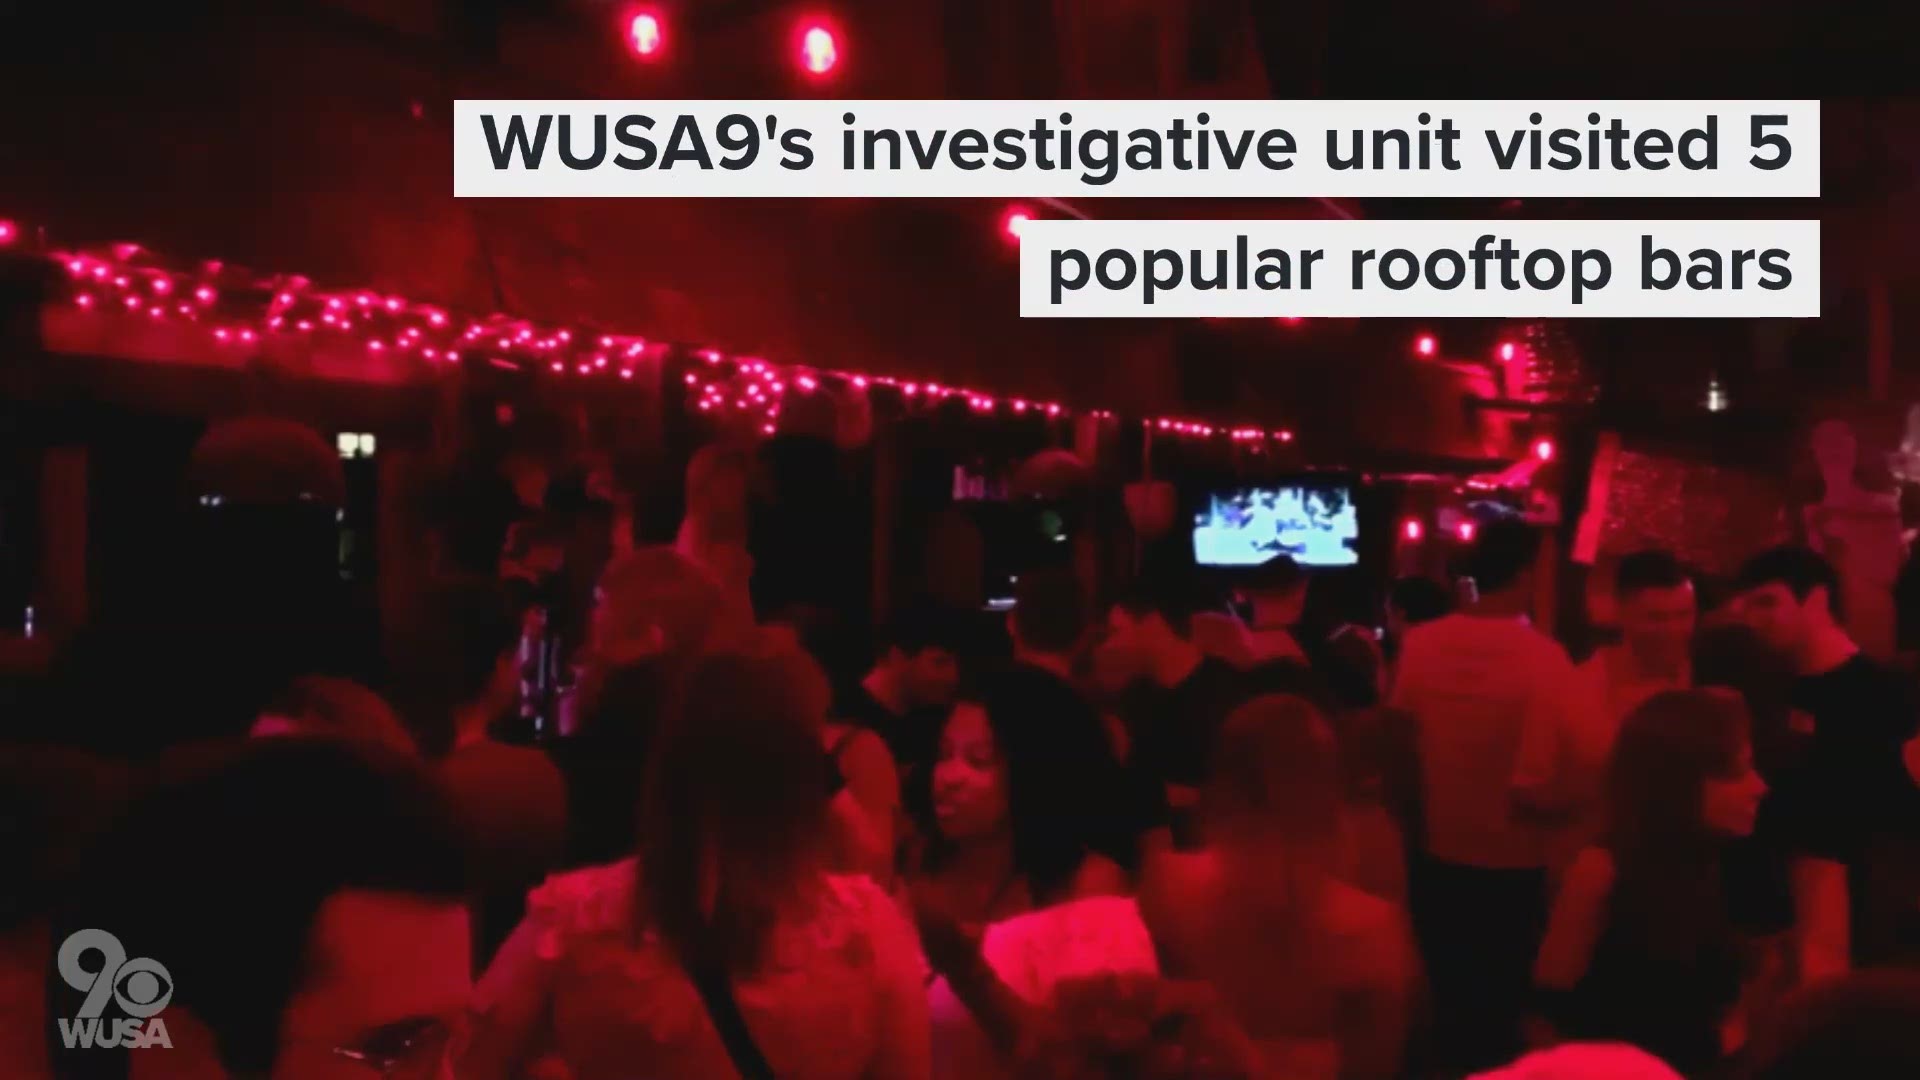 After we started asking questions, the DC Fire Marshal’s Office took a look at five rooftop bars – and found 69 violations, including some that had never been inspected before. There were blocked exits, exposed wires and dangerously overcrowded rooftops.